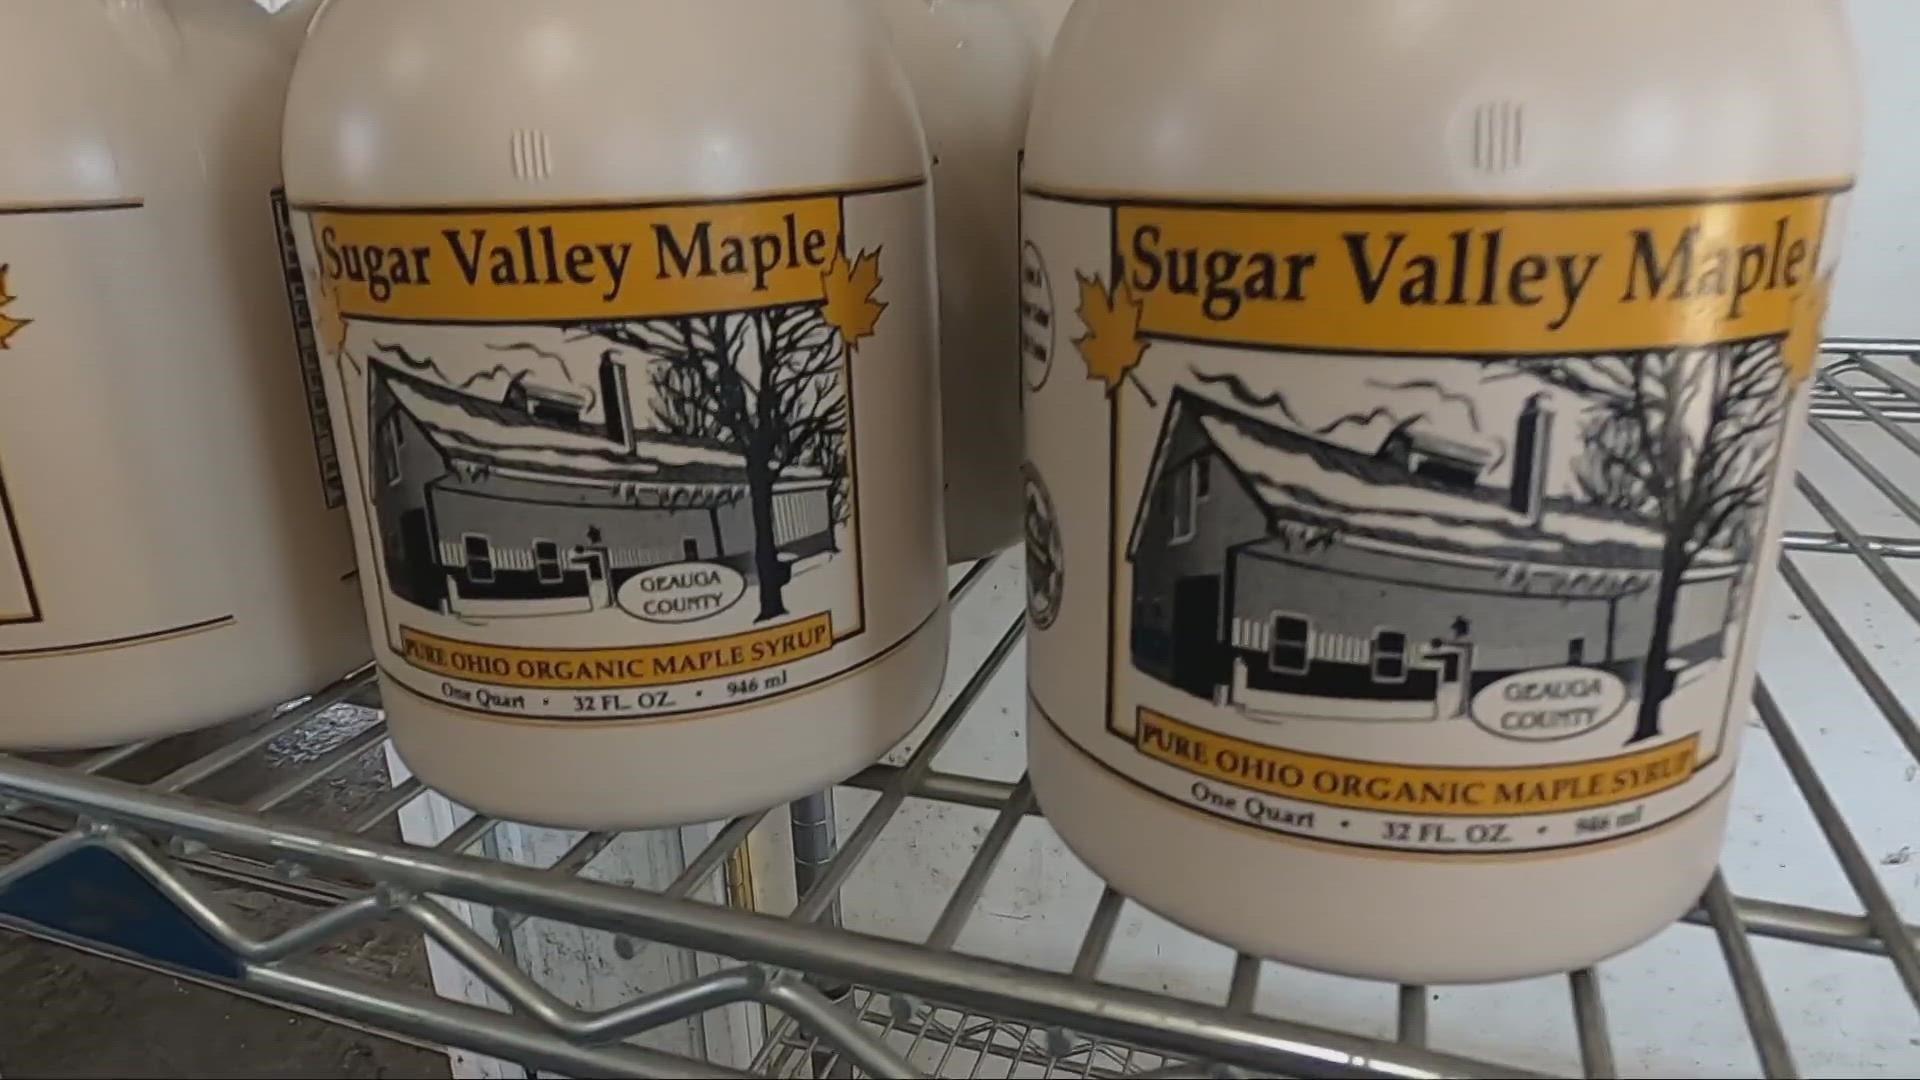 Maple syrup producers are saying this season has been off to a sweet start. Isabel Lawrence stopped by Sugar Valley Maple in Geauga County to see for herself.